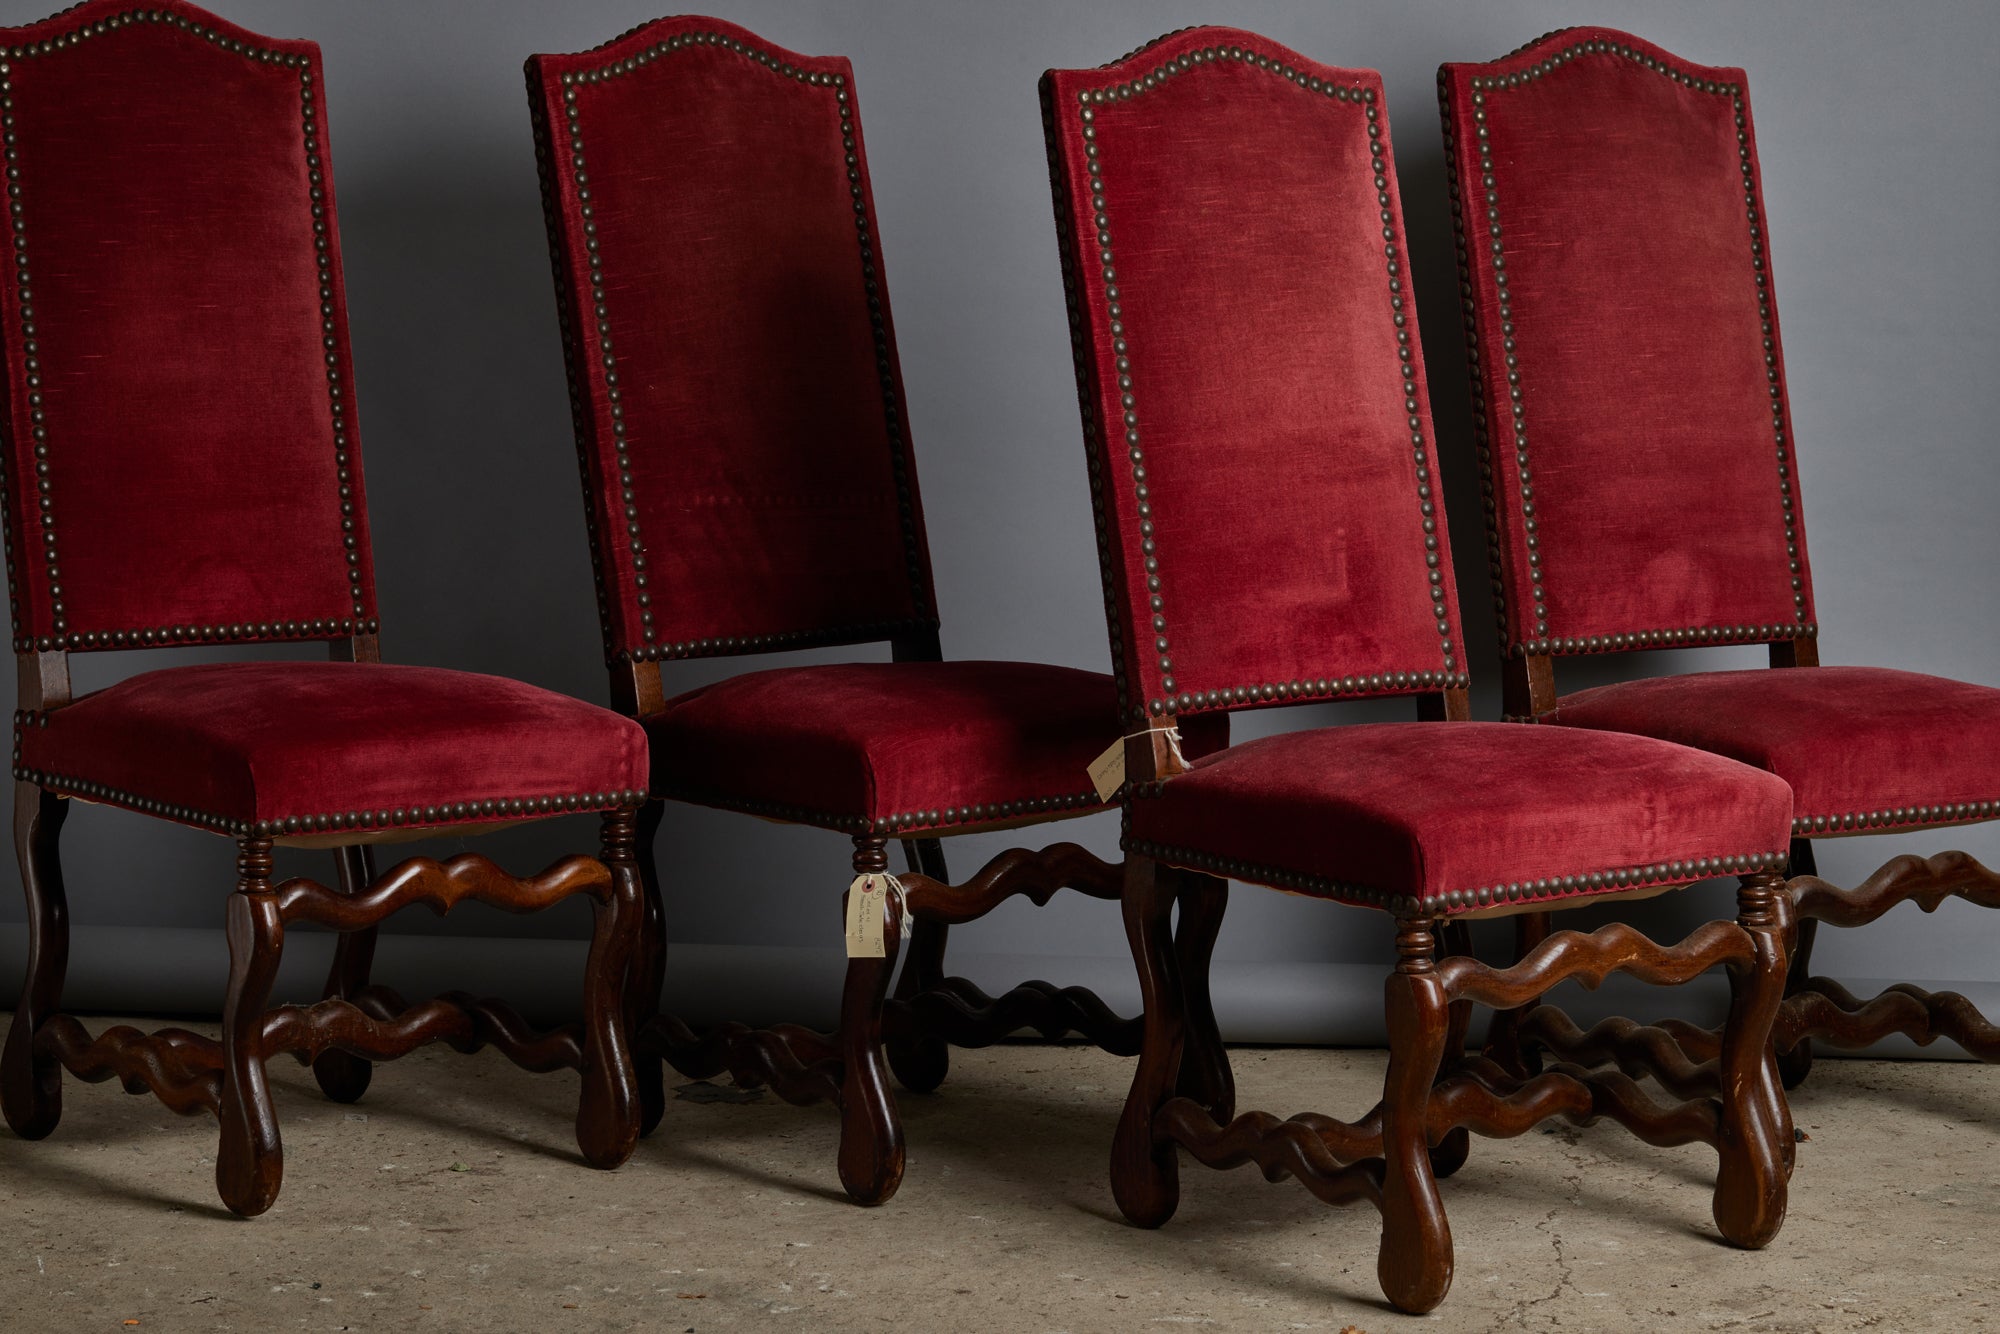 Set of 4 Louis XIV Style Dining Chairs Upholstered in Red Velvet